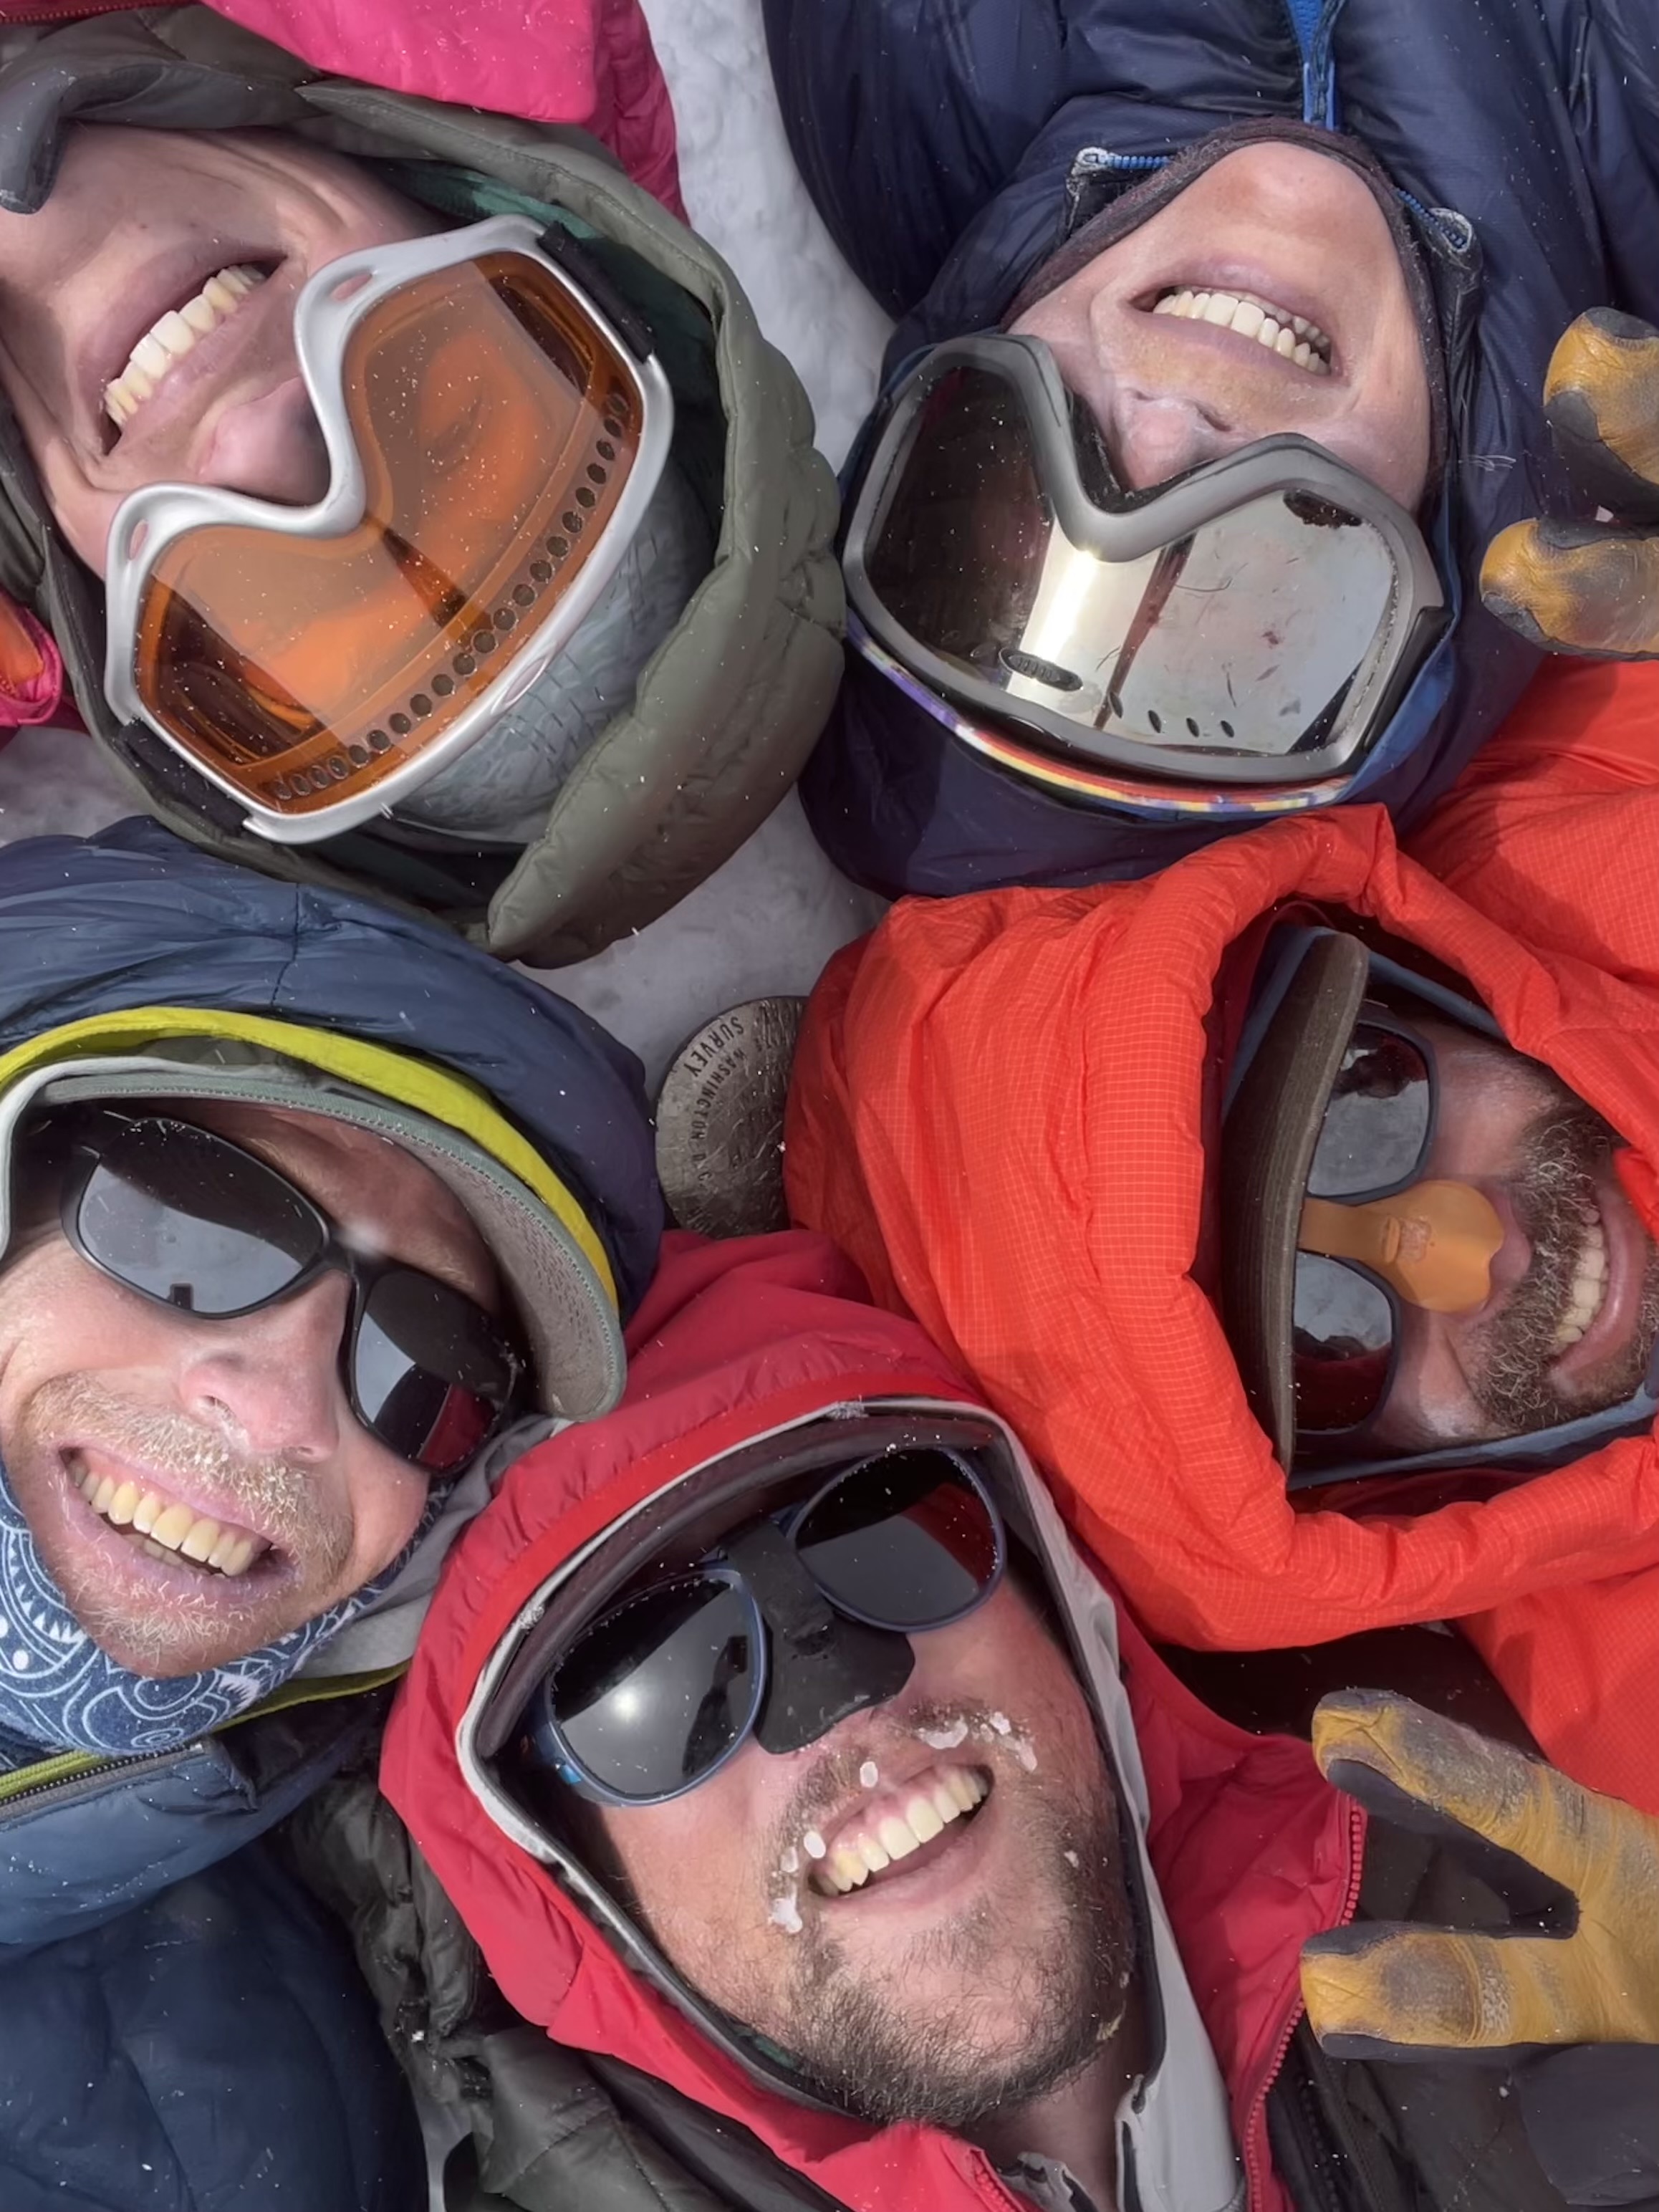 Closeup View from above of five hooded, smiling faces in a circle